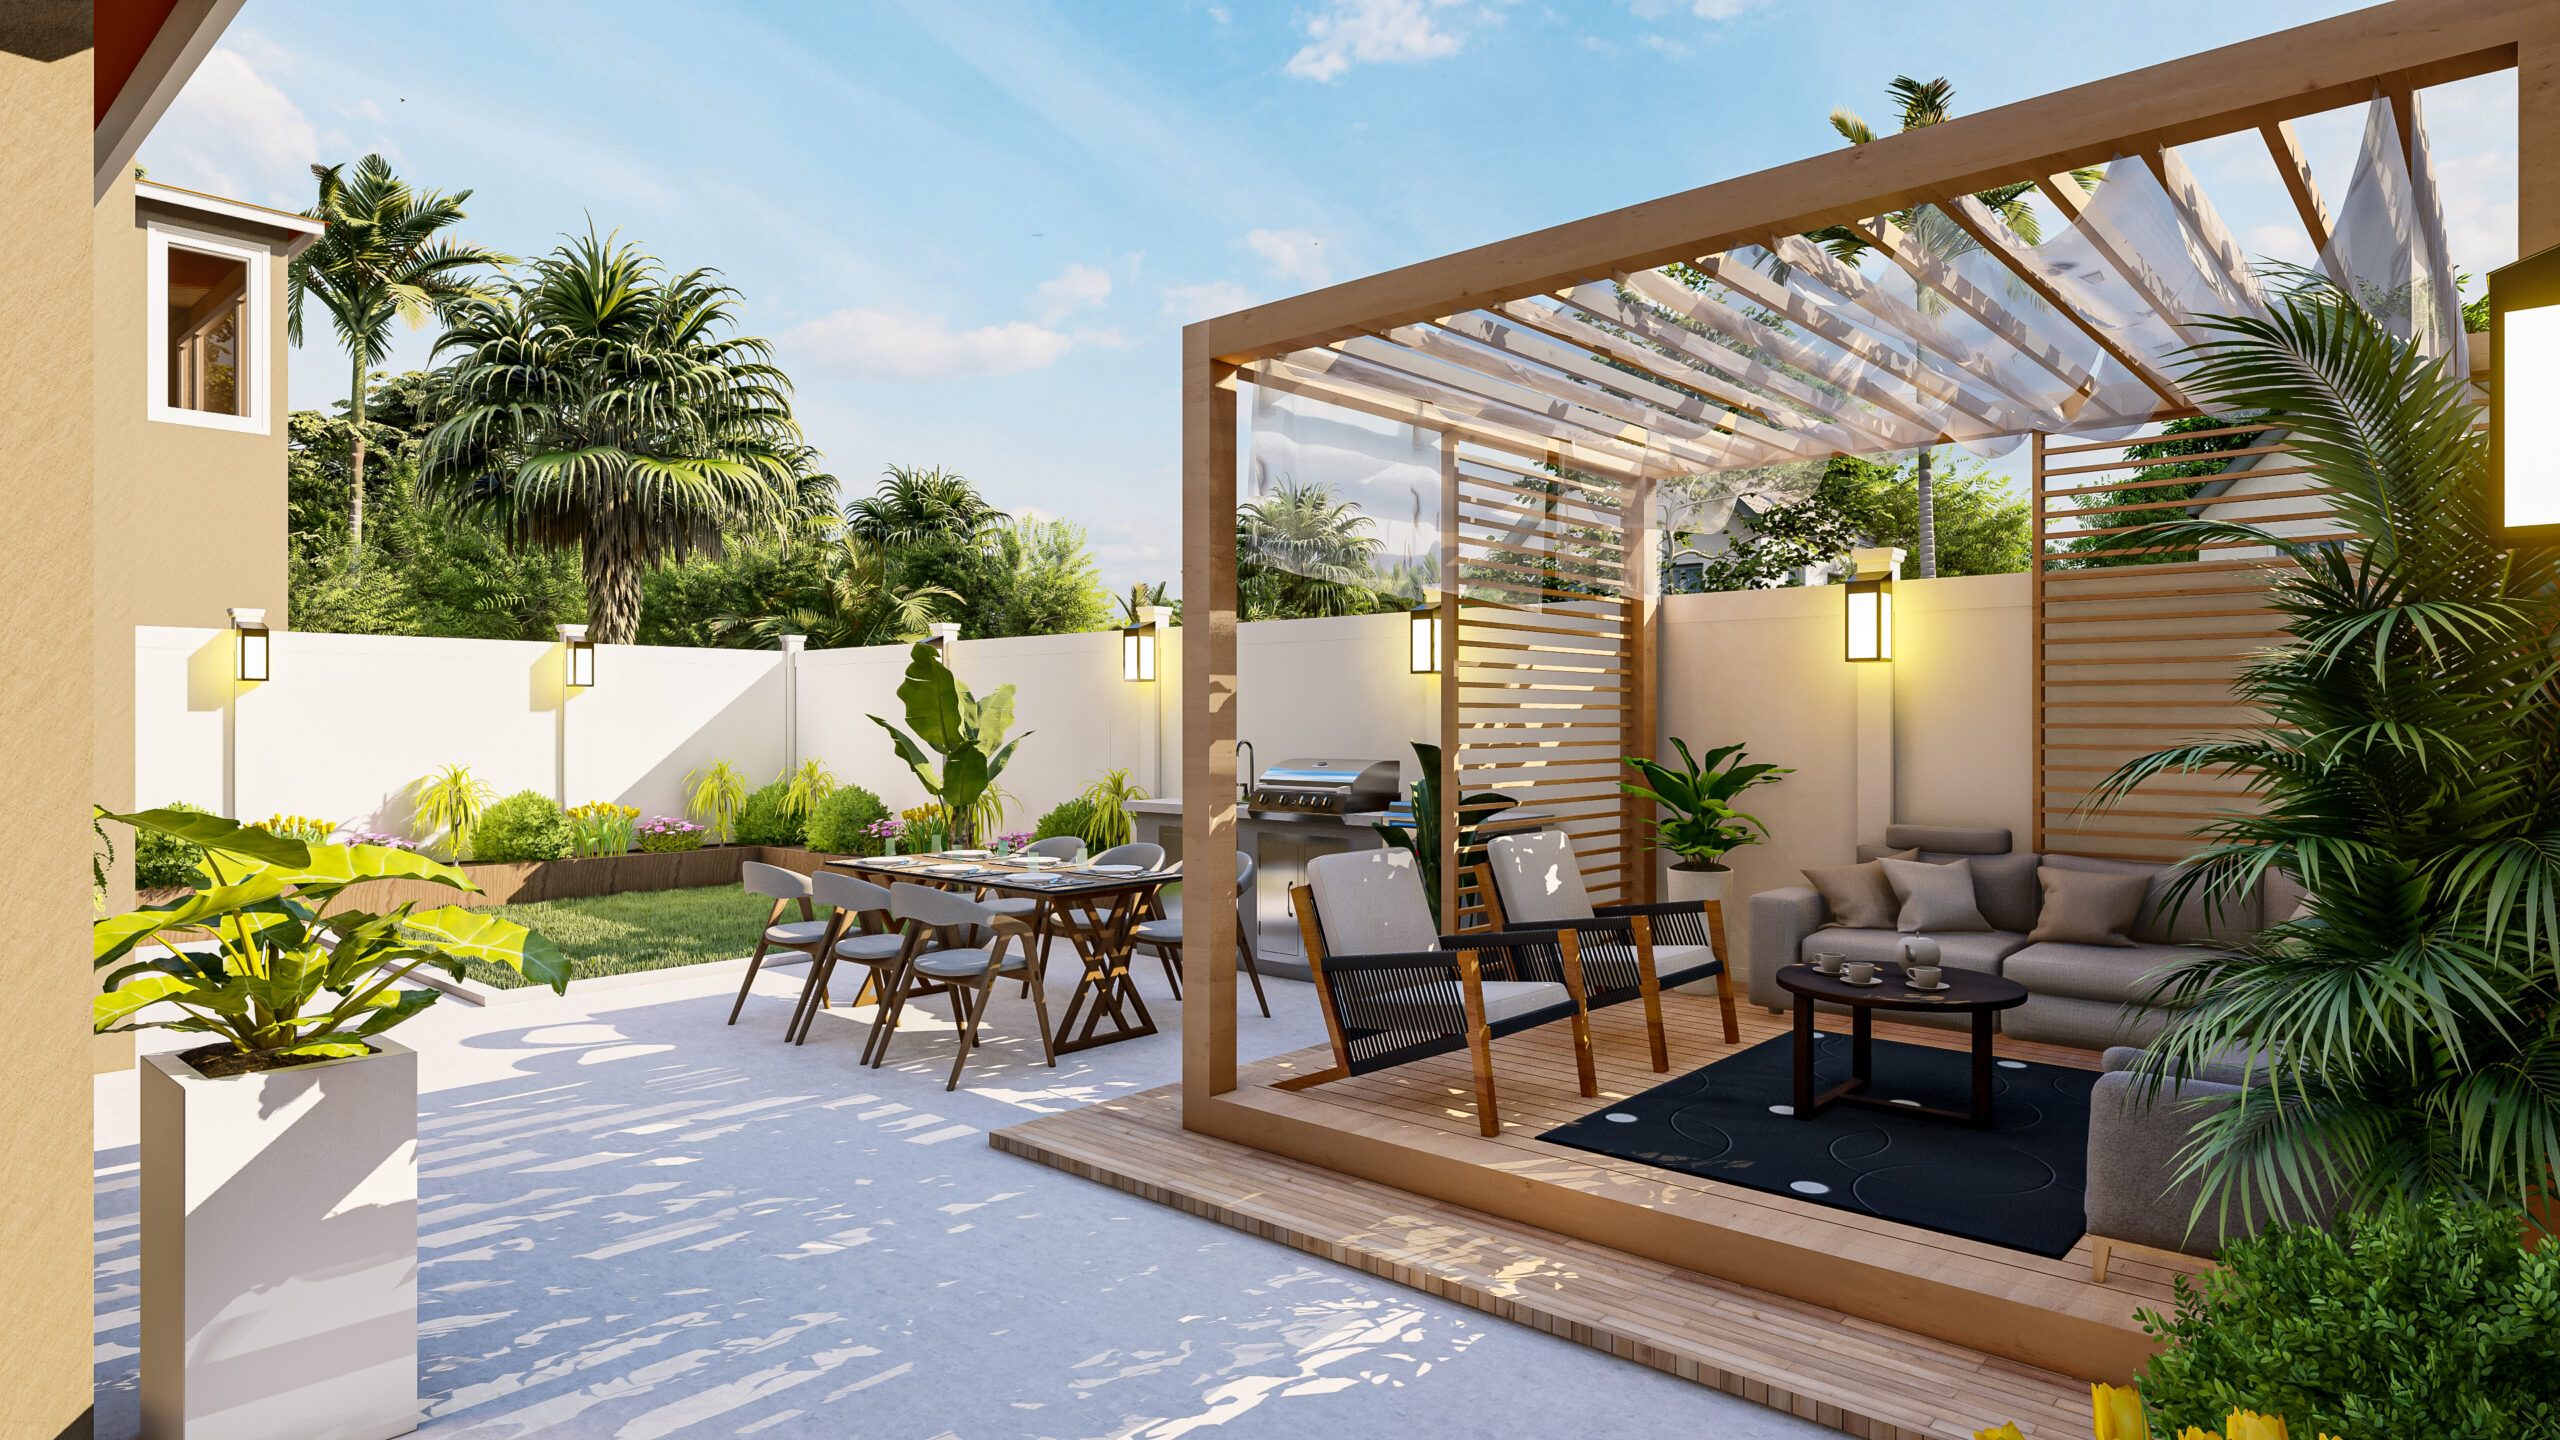 Modern small backyard with wooden pergola dining area, 3D design with high-quality rendering, featuring outdoor furniture, a grill, and lush landscaping.